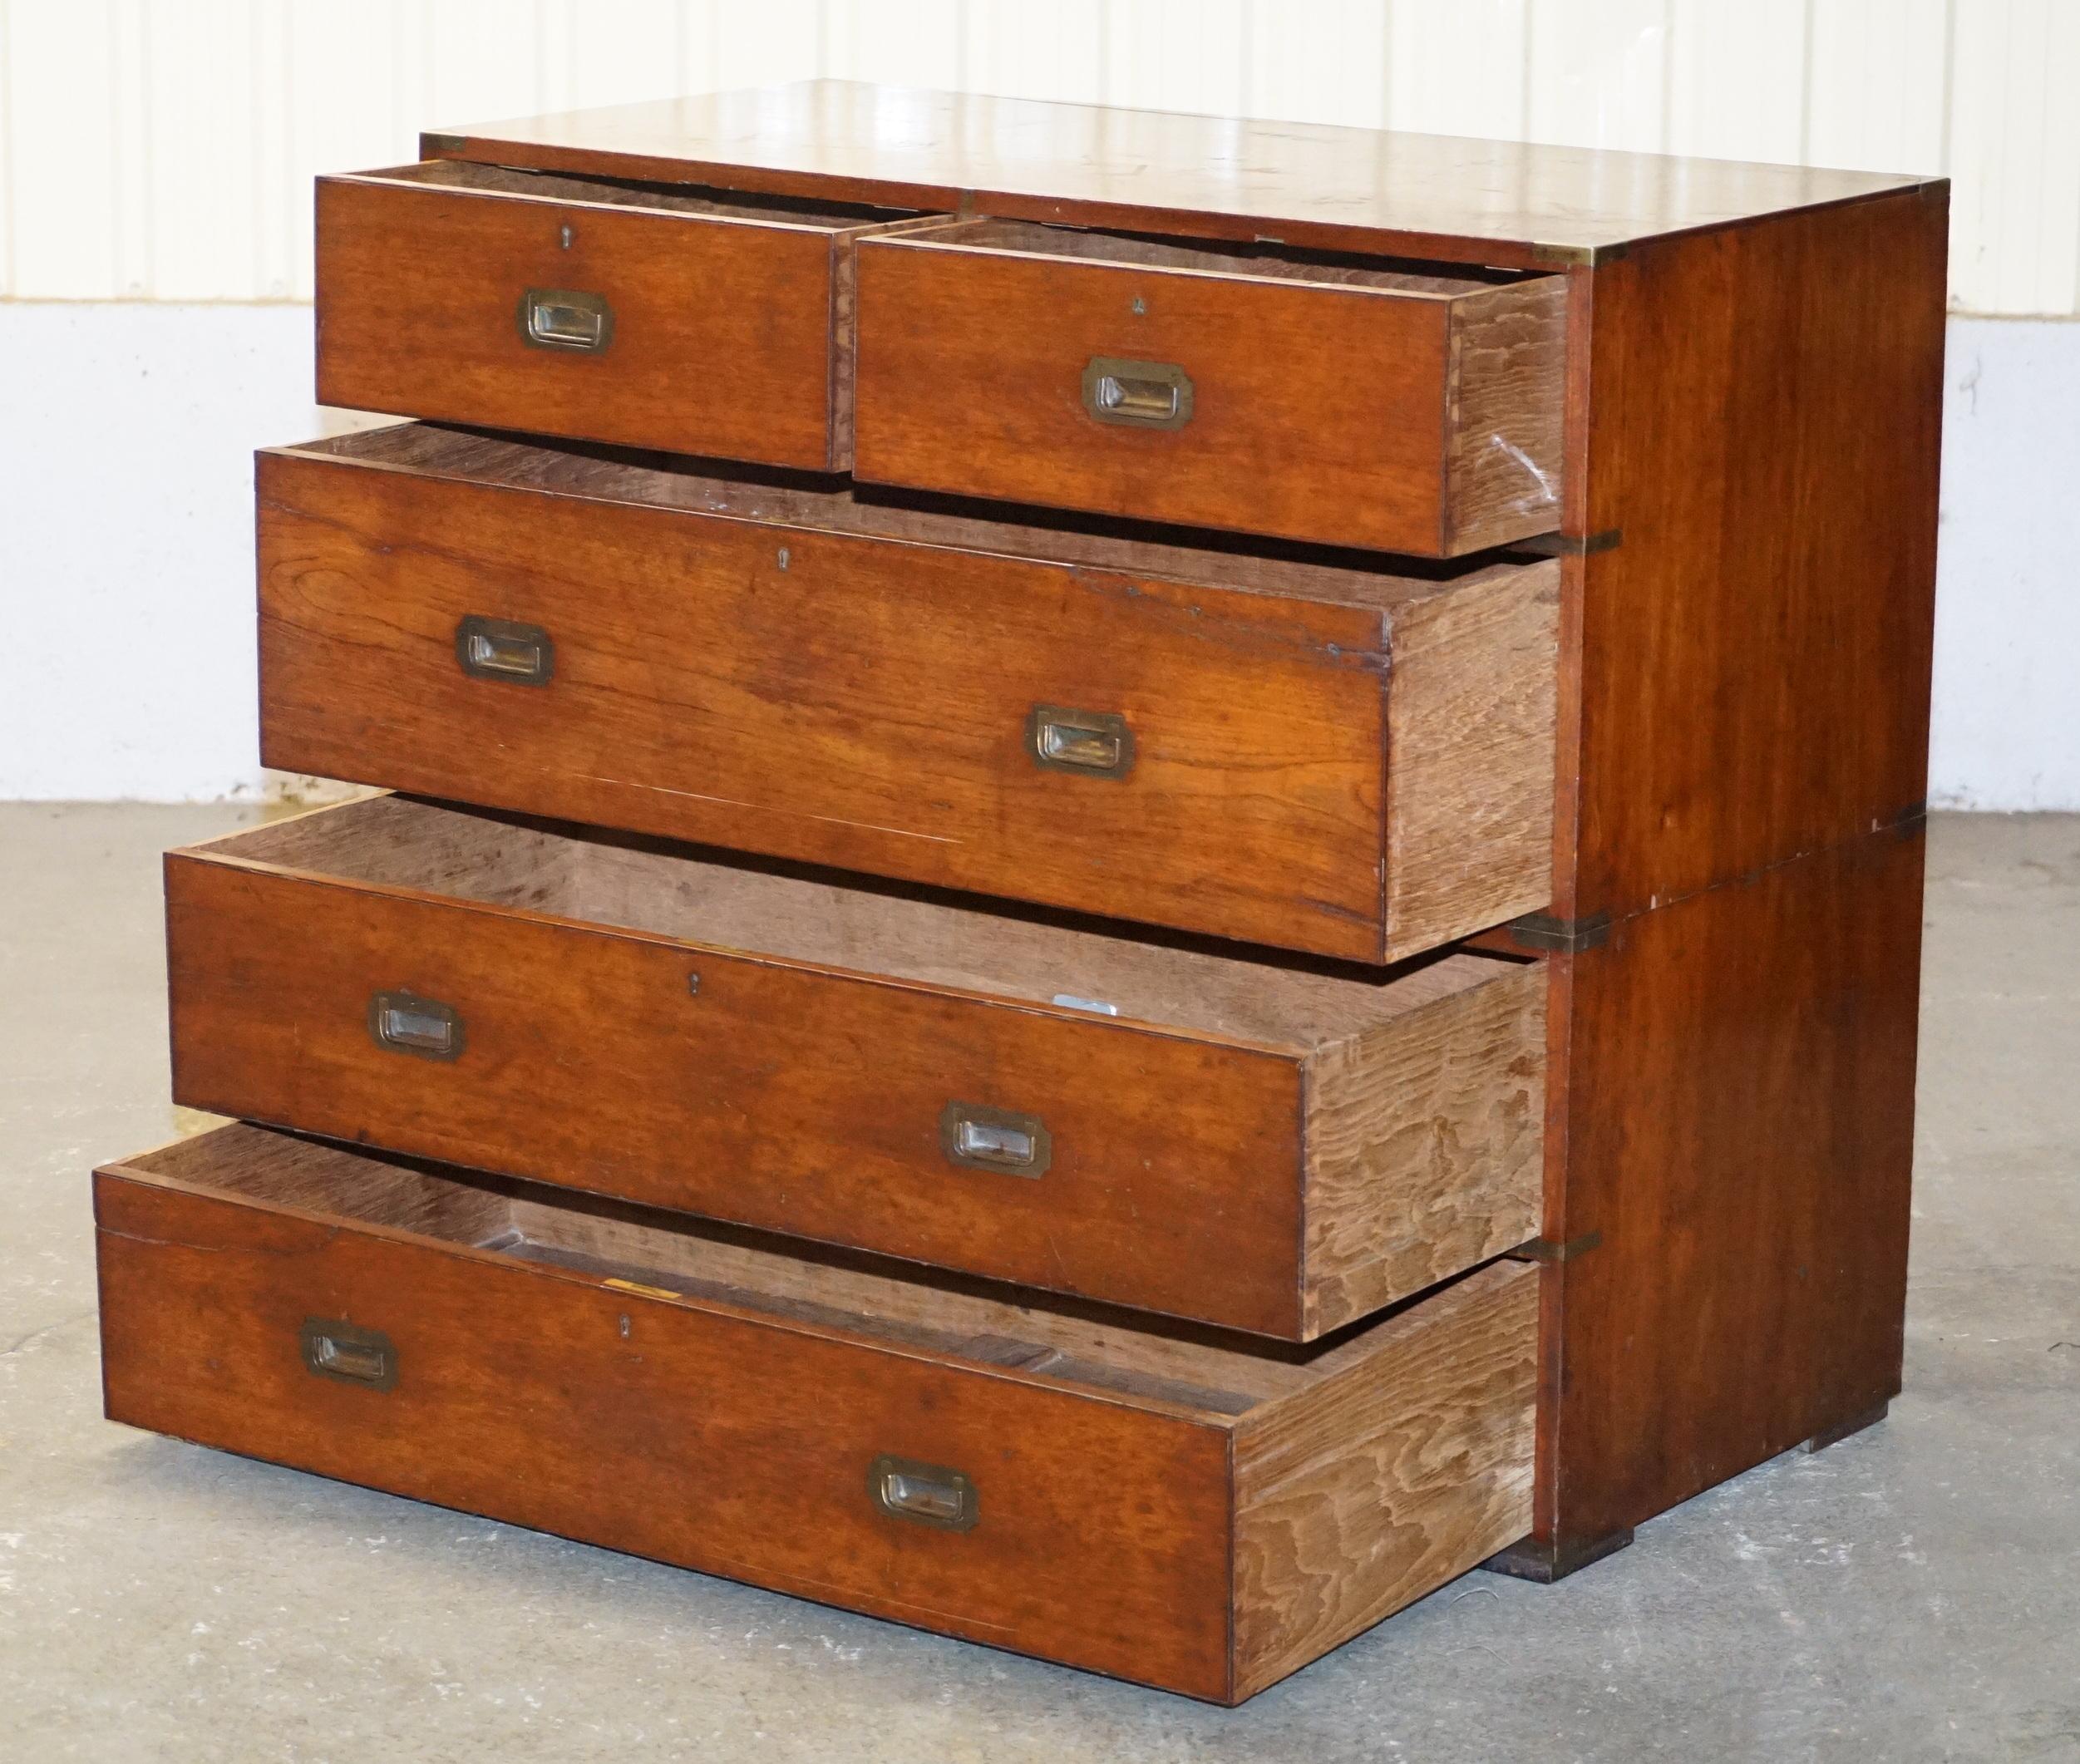 Original circa 1900 Army & Navy C.S.L Stamped Military Campaign Chest of Drawers 9